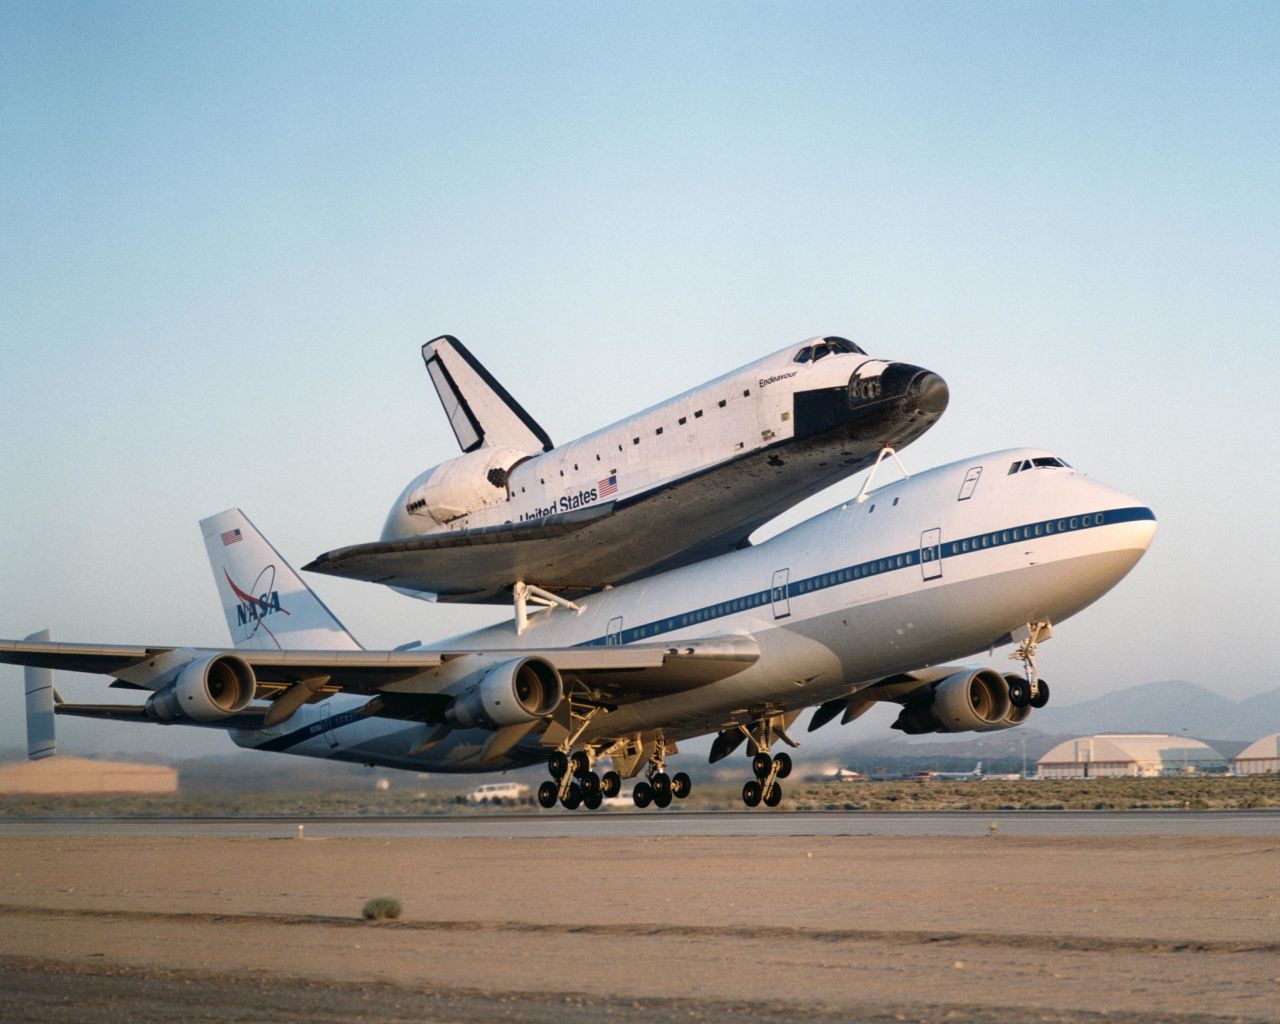 The aircraft was customized for maximum power. The 747 was stripped clean of everything in the main cabin, a <a href="http://www.cnn.com/2012/04/17/us/shuttle-discovery-weight/" target="_blank">NASA spokeswoman told CNN in 2012</a>.